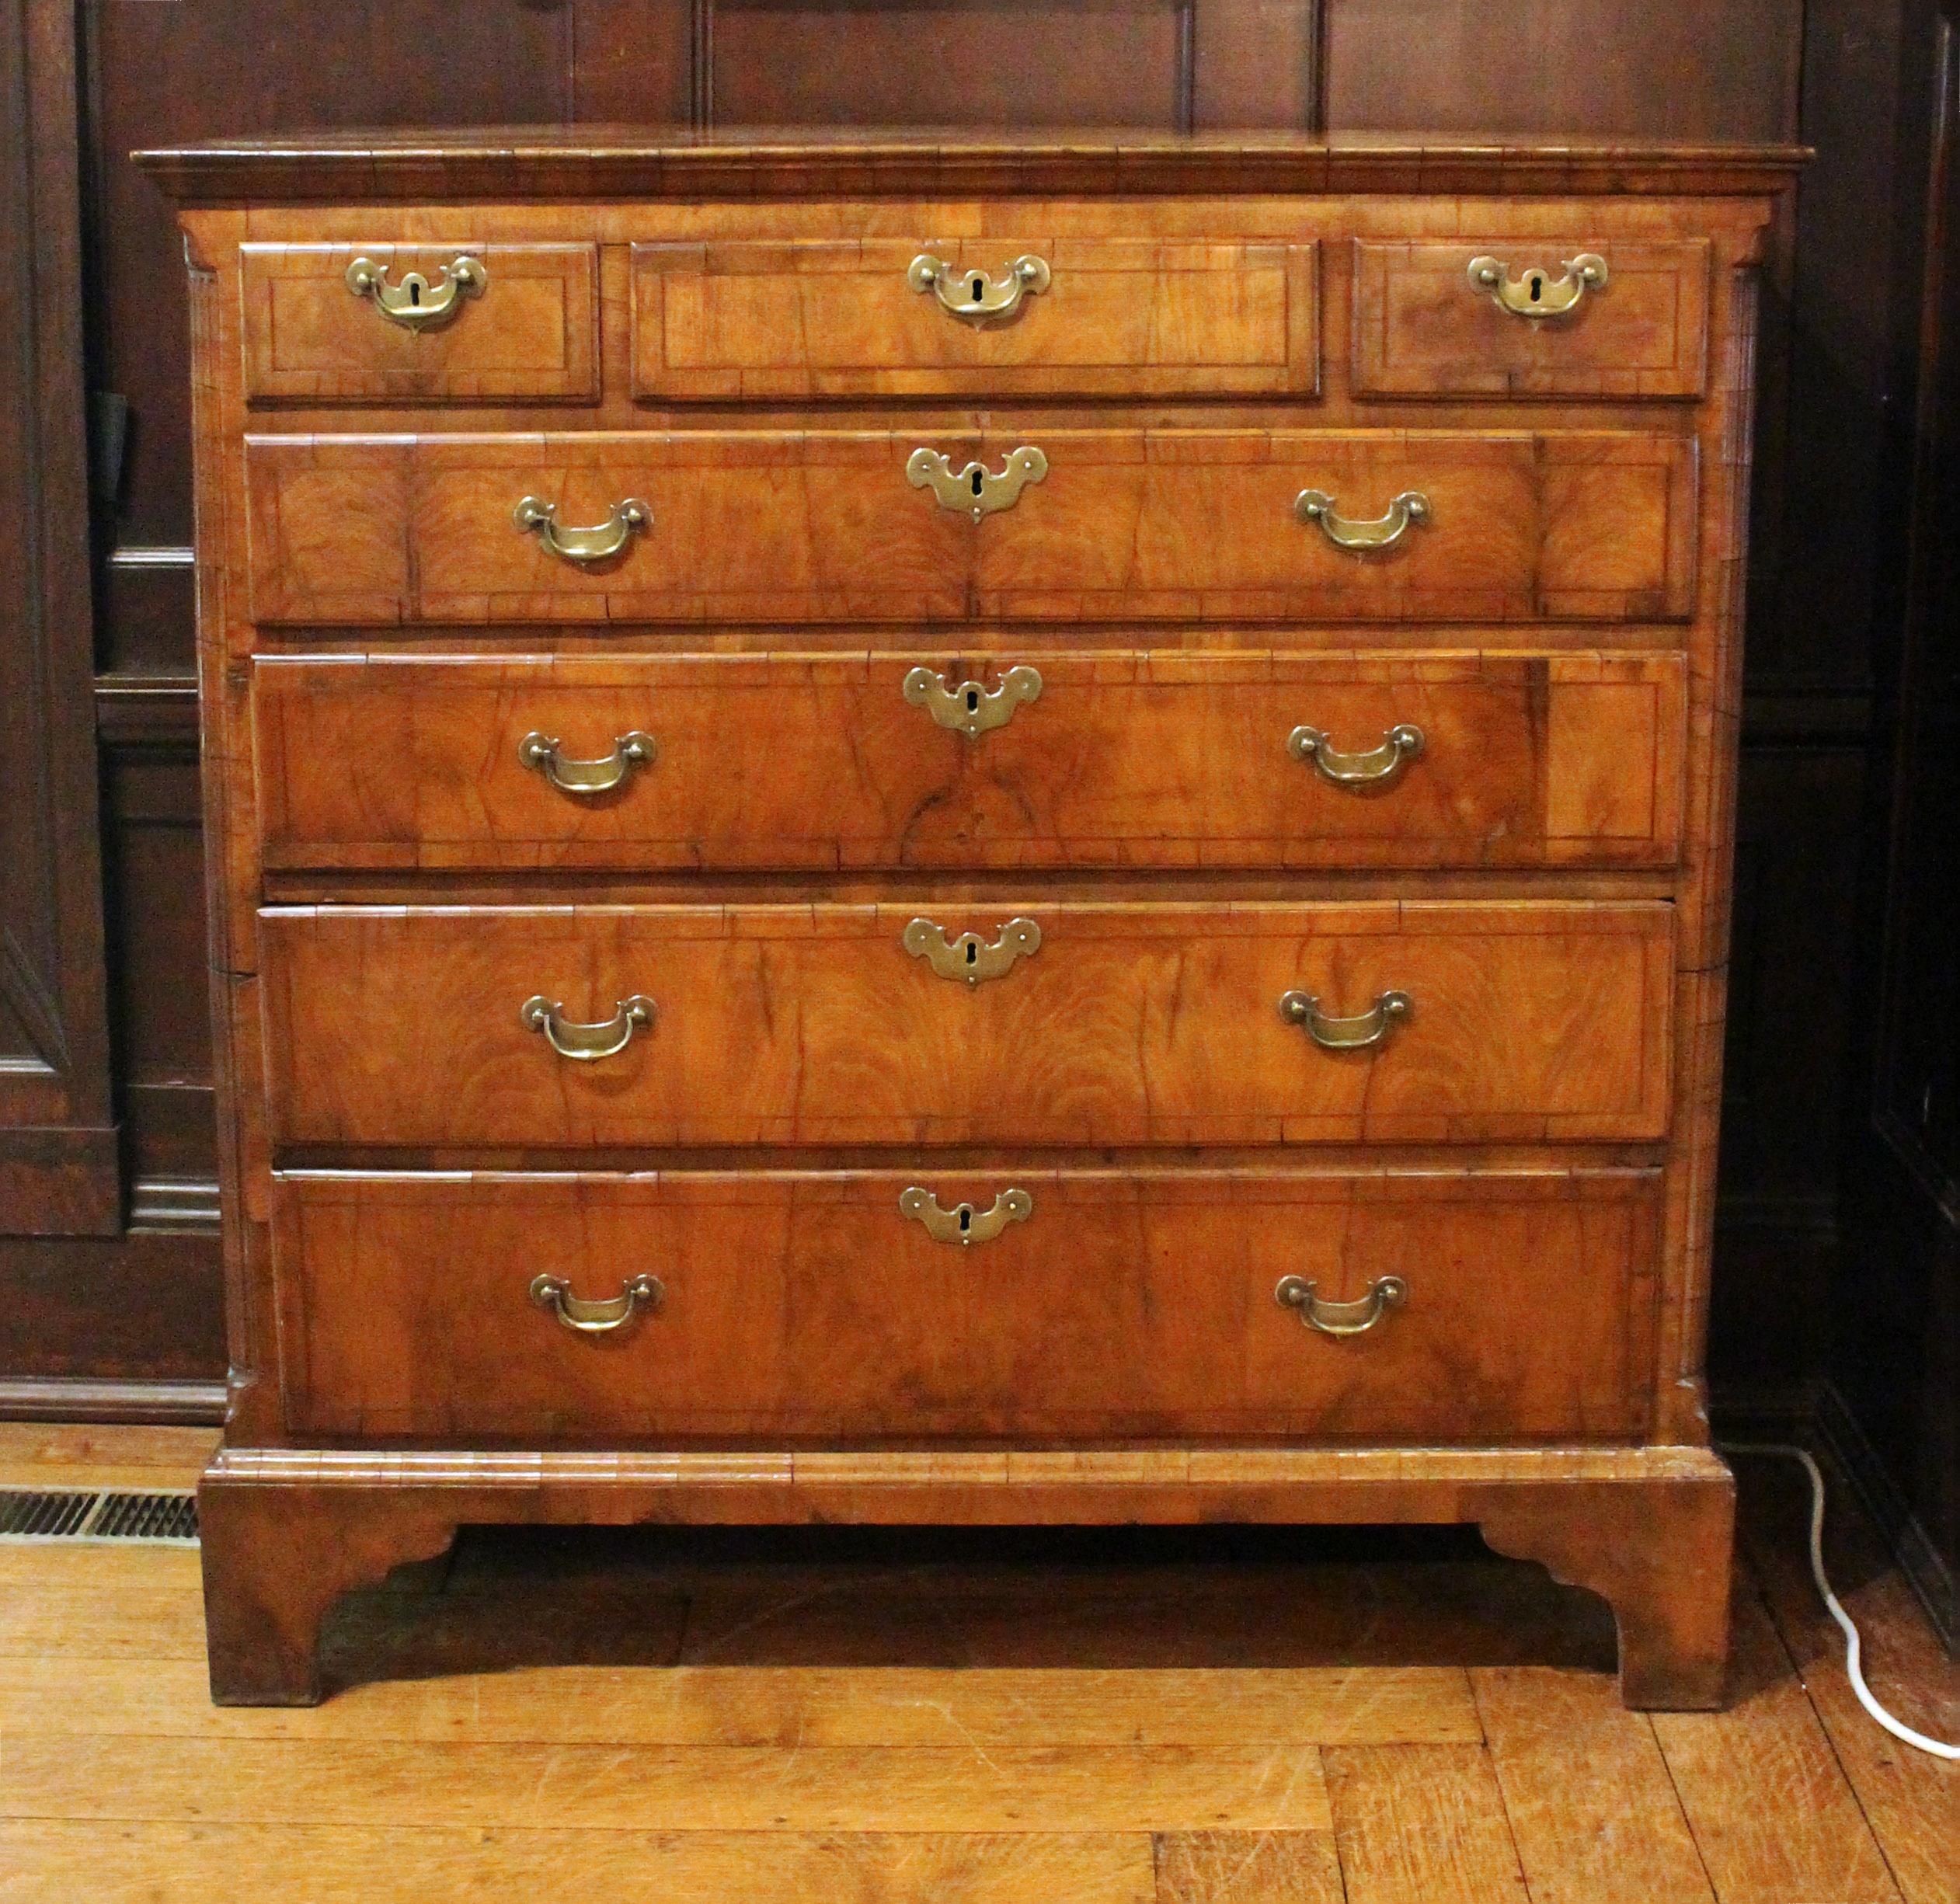 Circa 1750 town house chest of drawers, English. Superb quality, George II period, walnut veneer. Called a town house chest for its 2-part construction allowing it up narrow staircases. Canted, fluted quarter columns. Original bracket feet. Later,